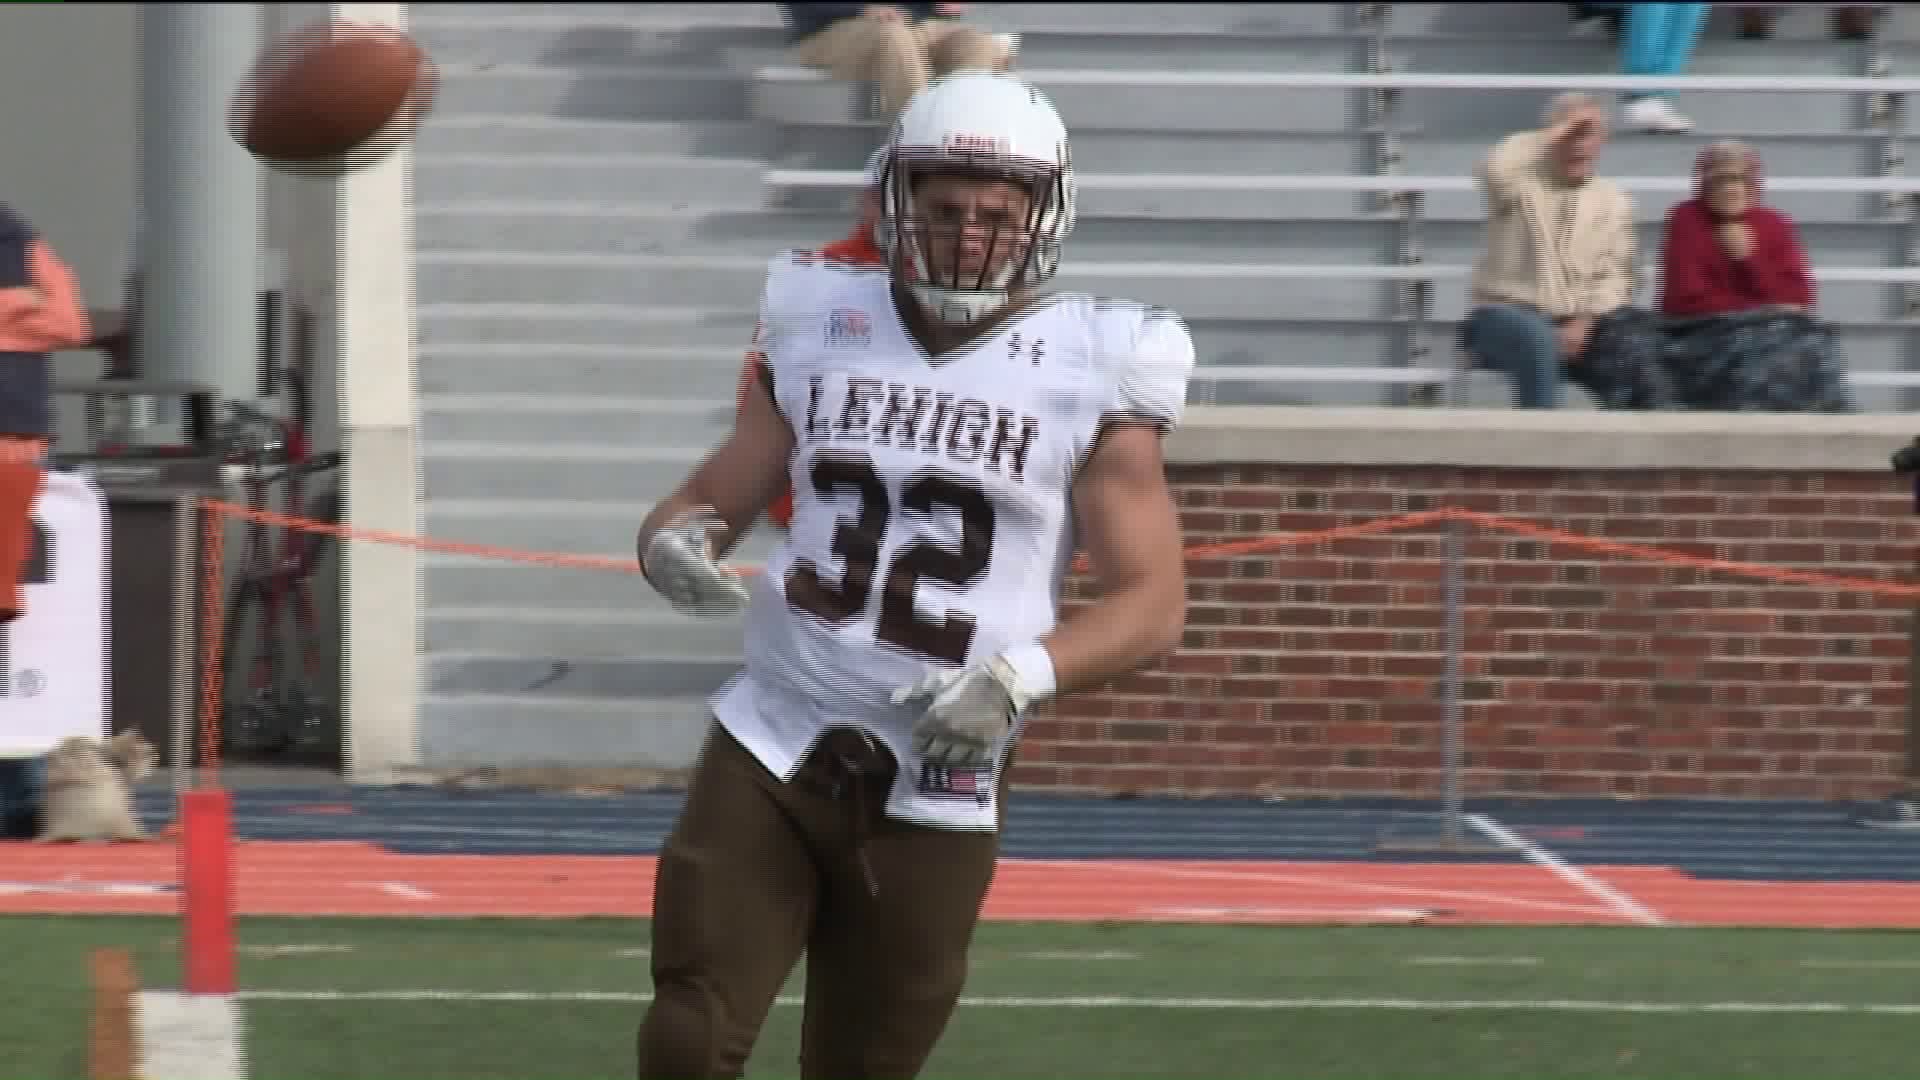 Dominick Bragalone Shines as Lehigh Tops Bucknell 42-21